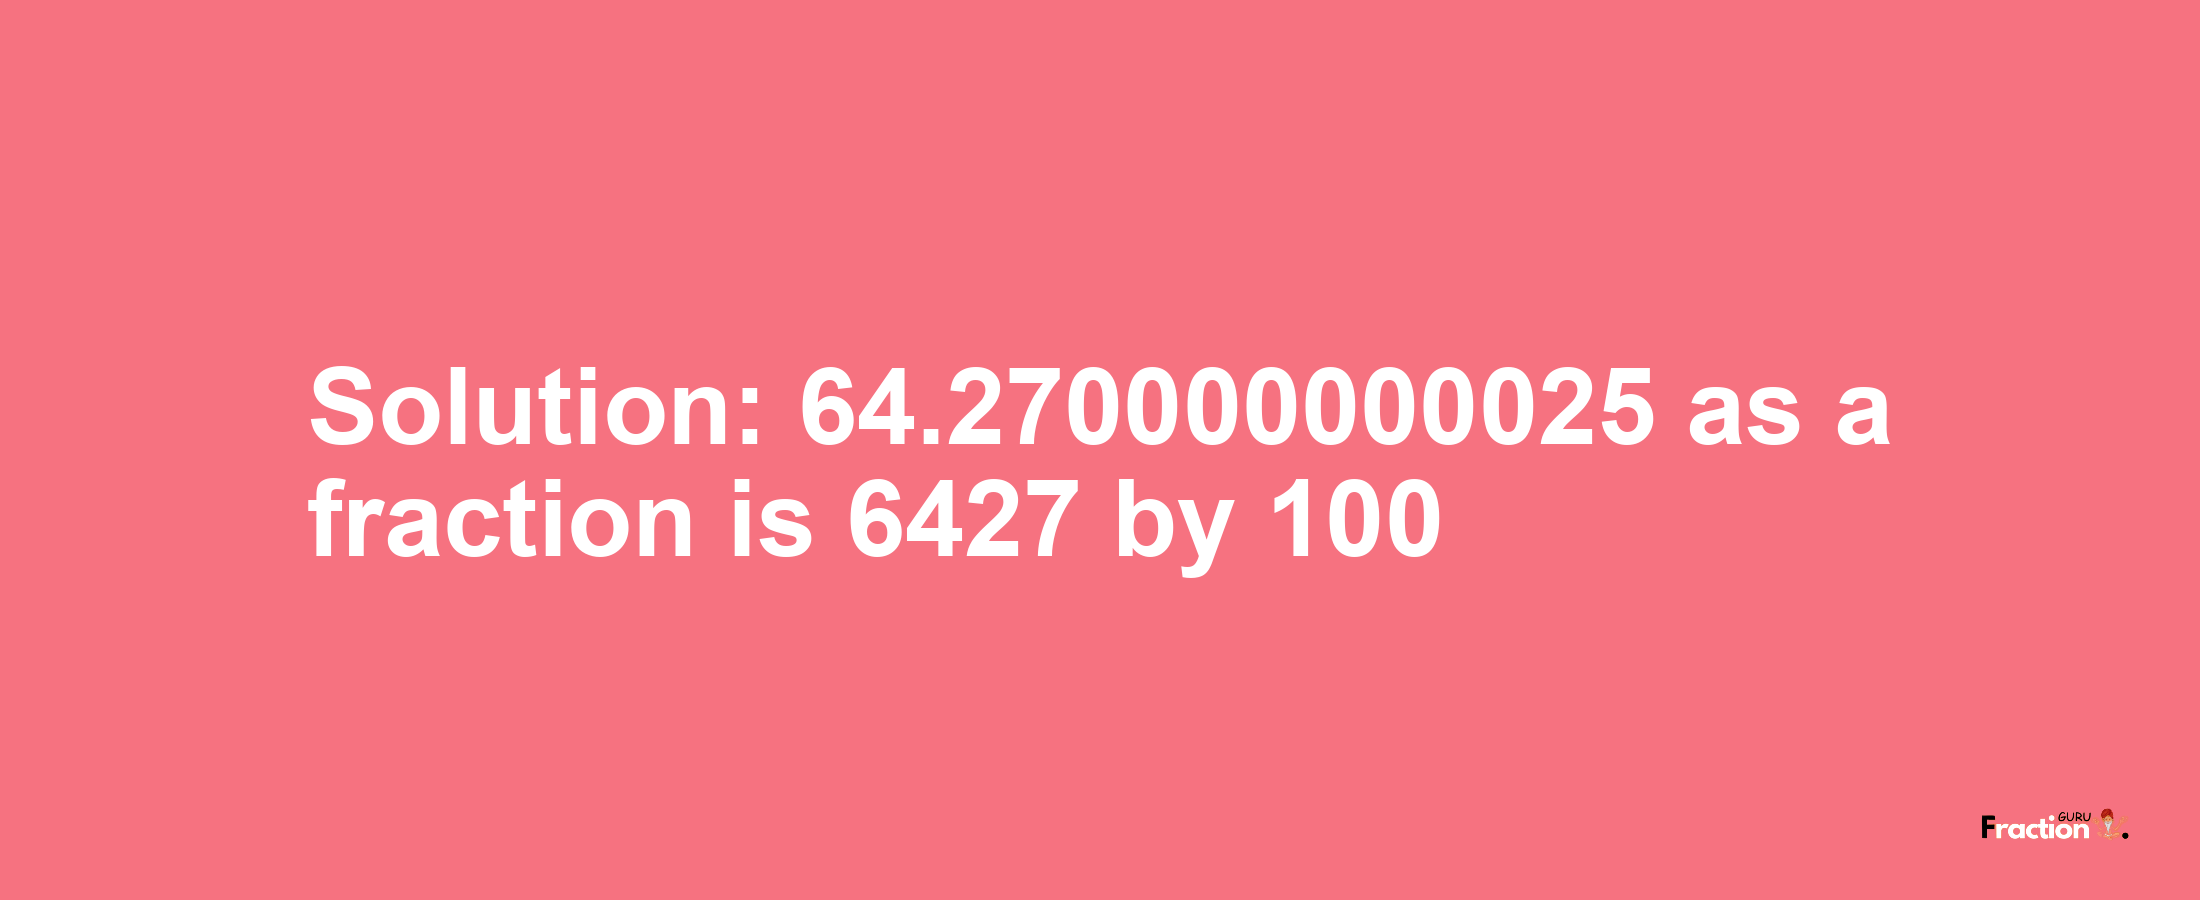 Solution:64.270000000025 as a fraction is 6427/100